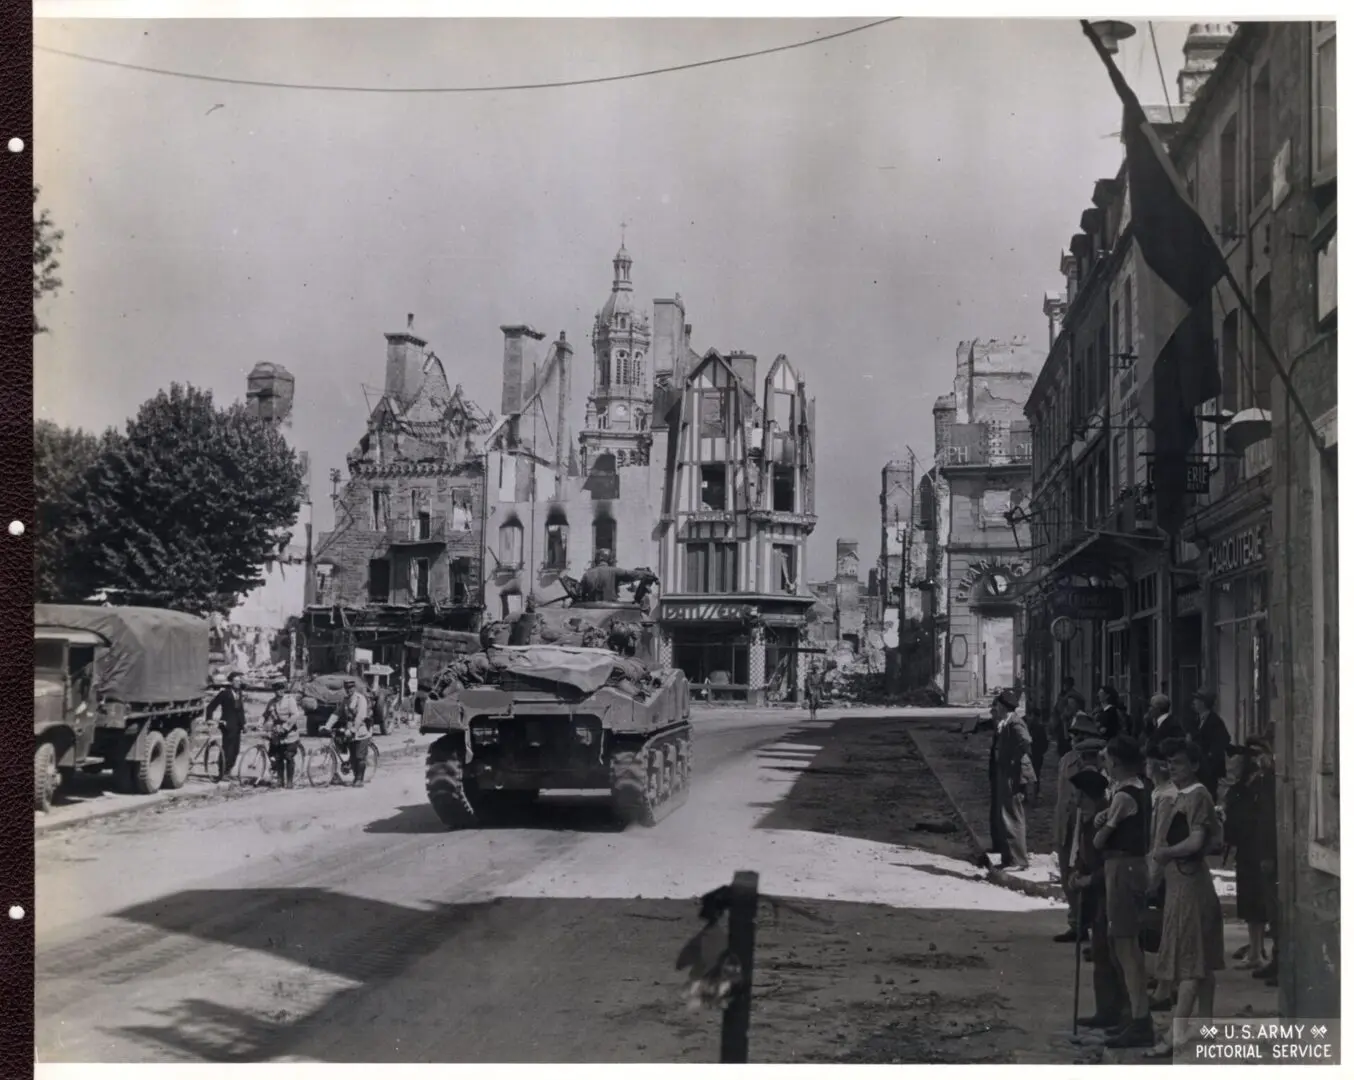 The American troops are welcomed into a French village